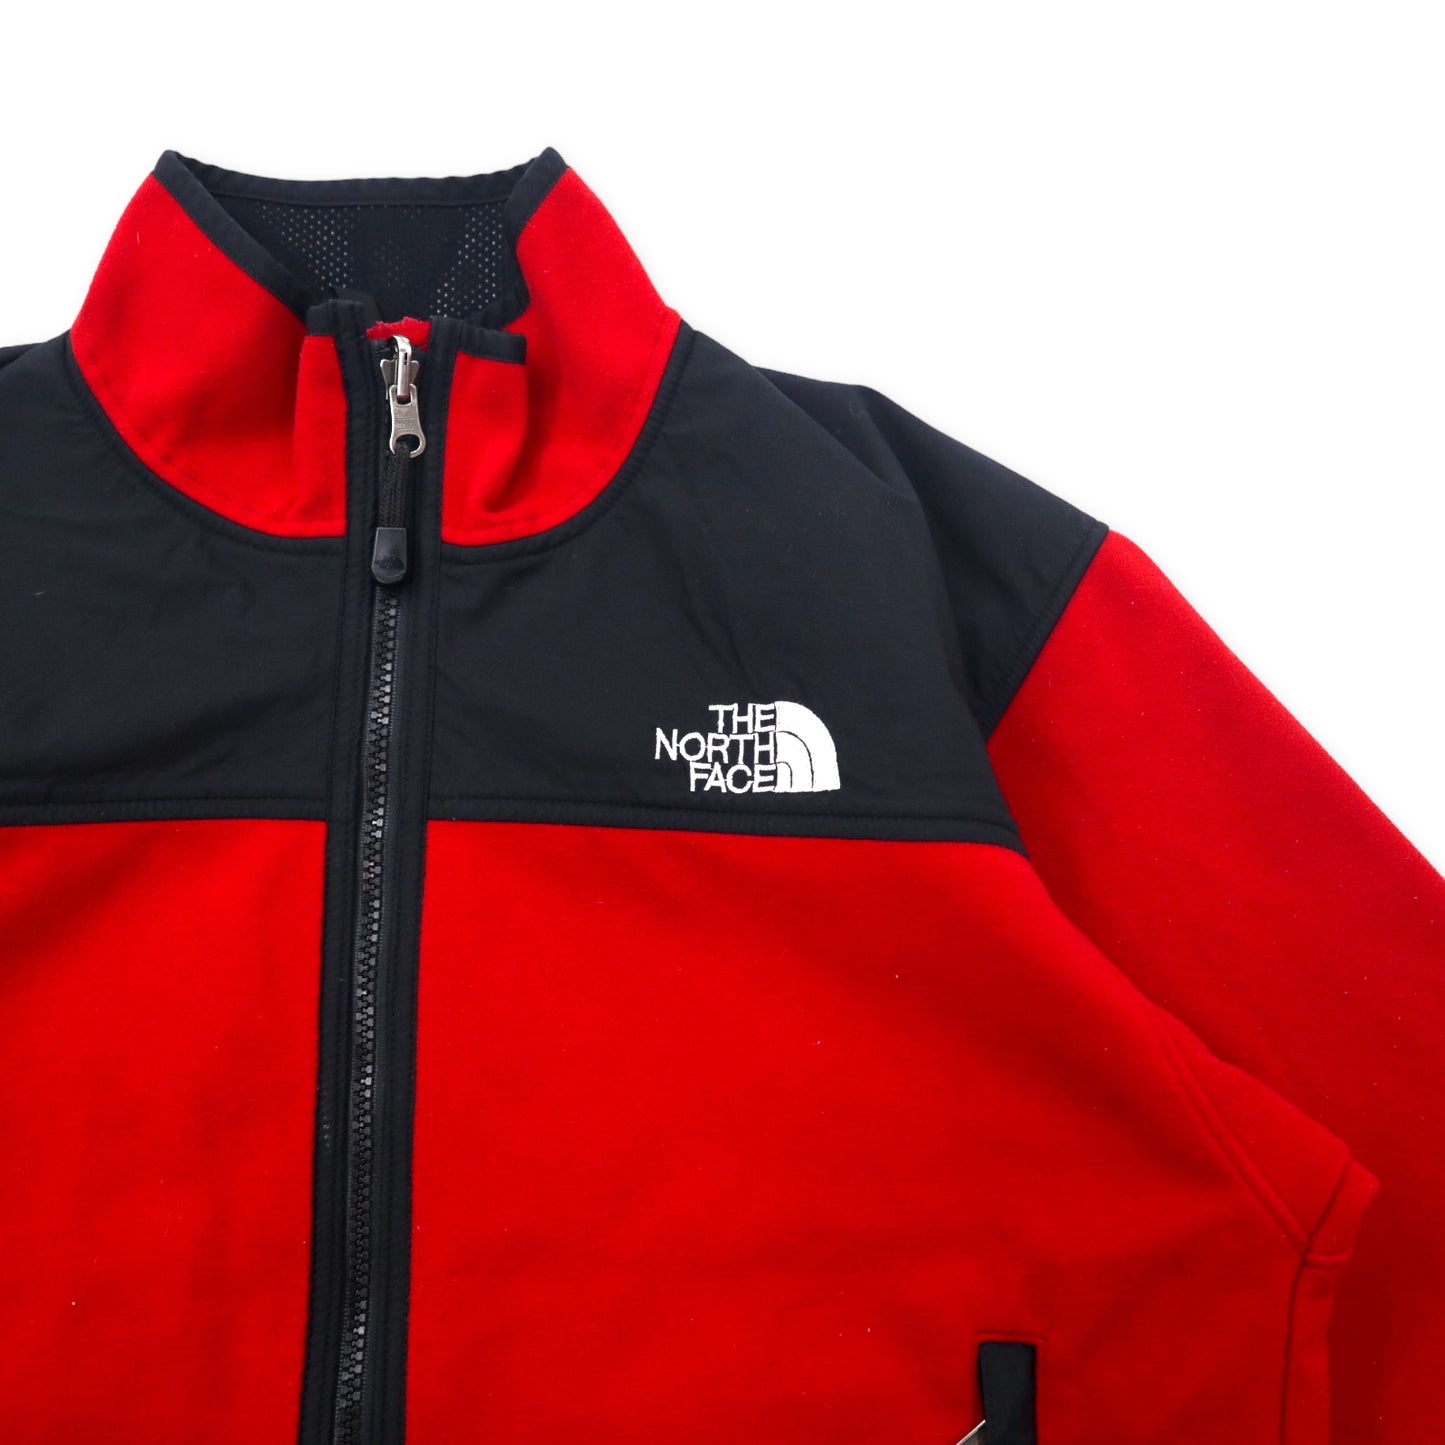 THE NORTH FACE 90's FLEECE Jacket S Red Black Goo Rind Stopper 